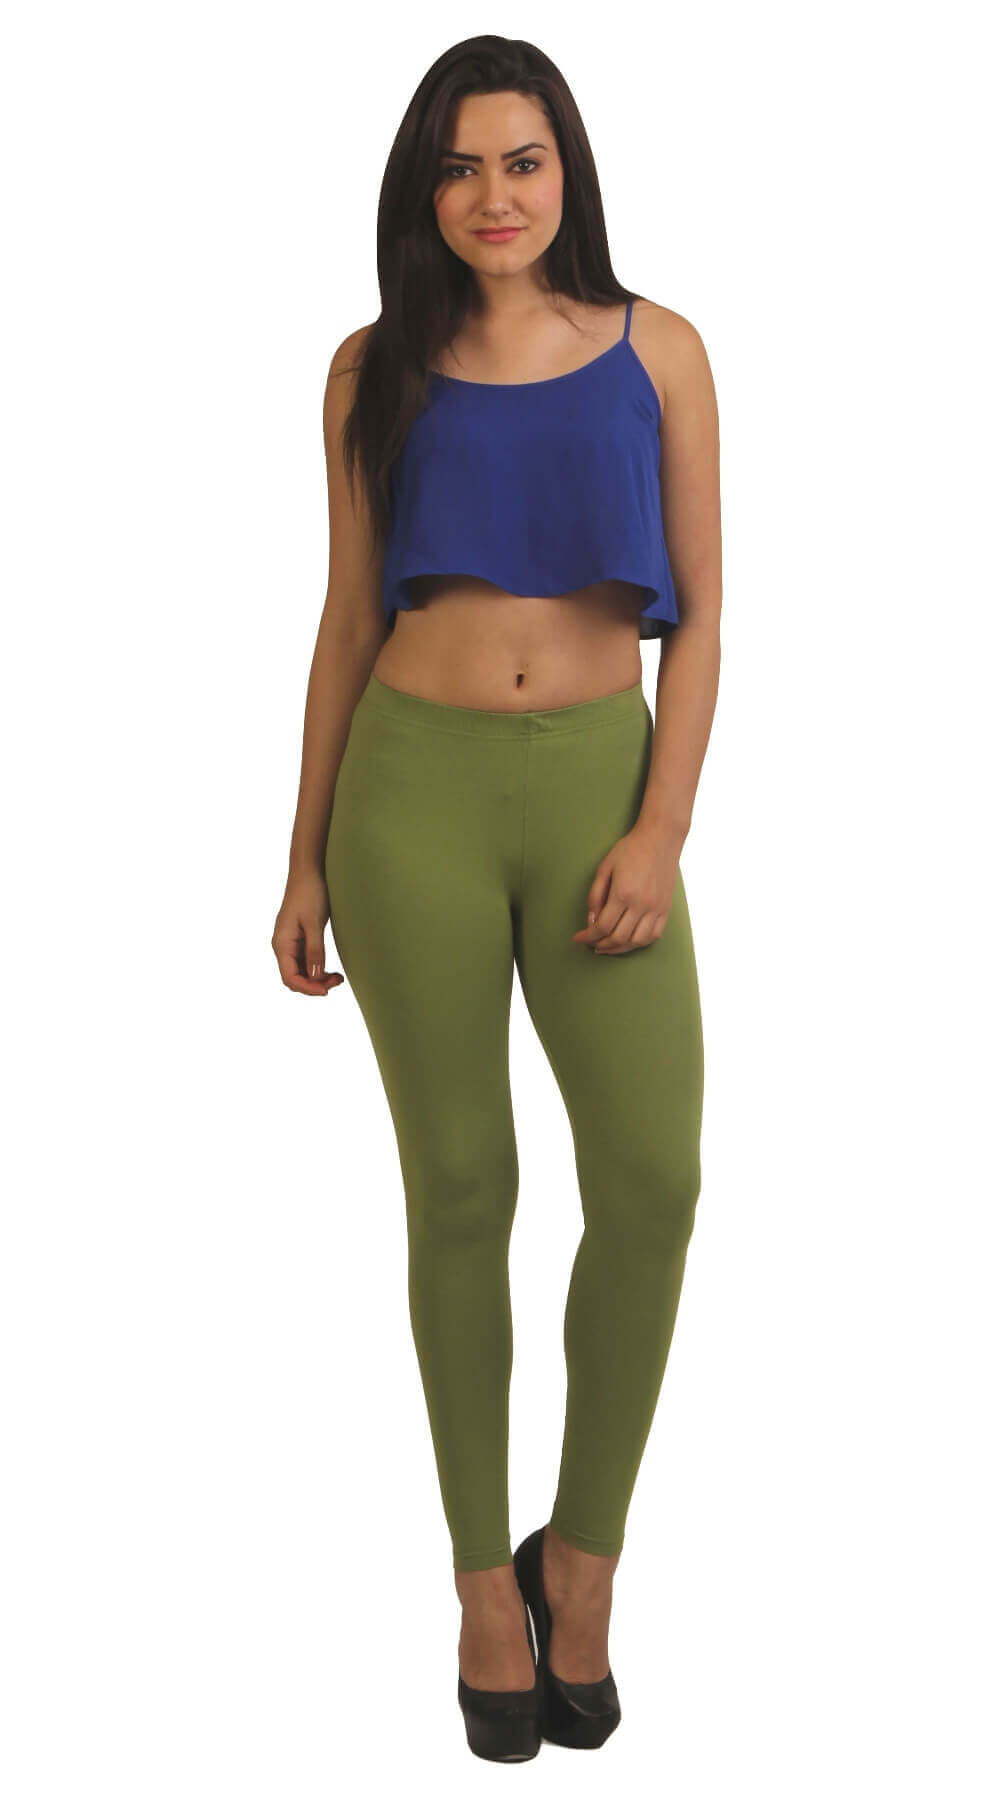 https://frenchtrendz.com/images/thumbs/0000389_frenchtrendz-cotton-spandex-parrot-green-ankle-leggings.jpeg